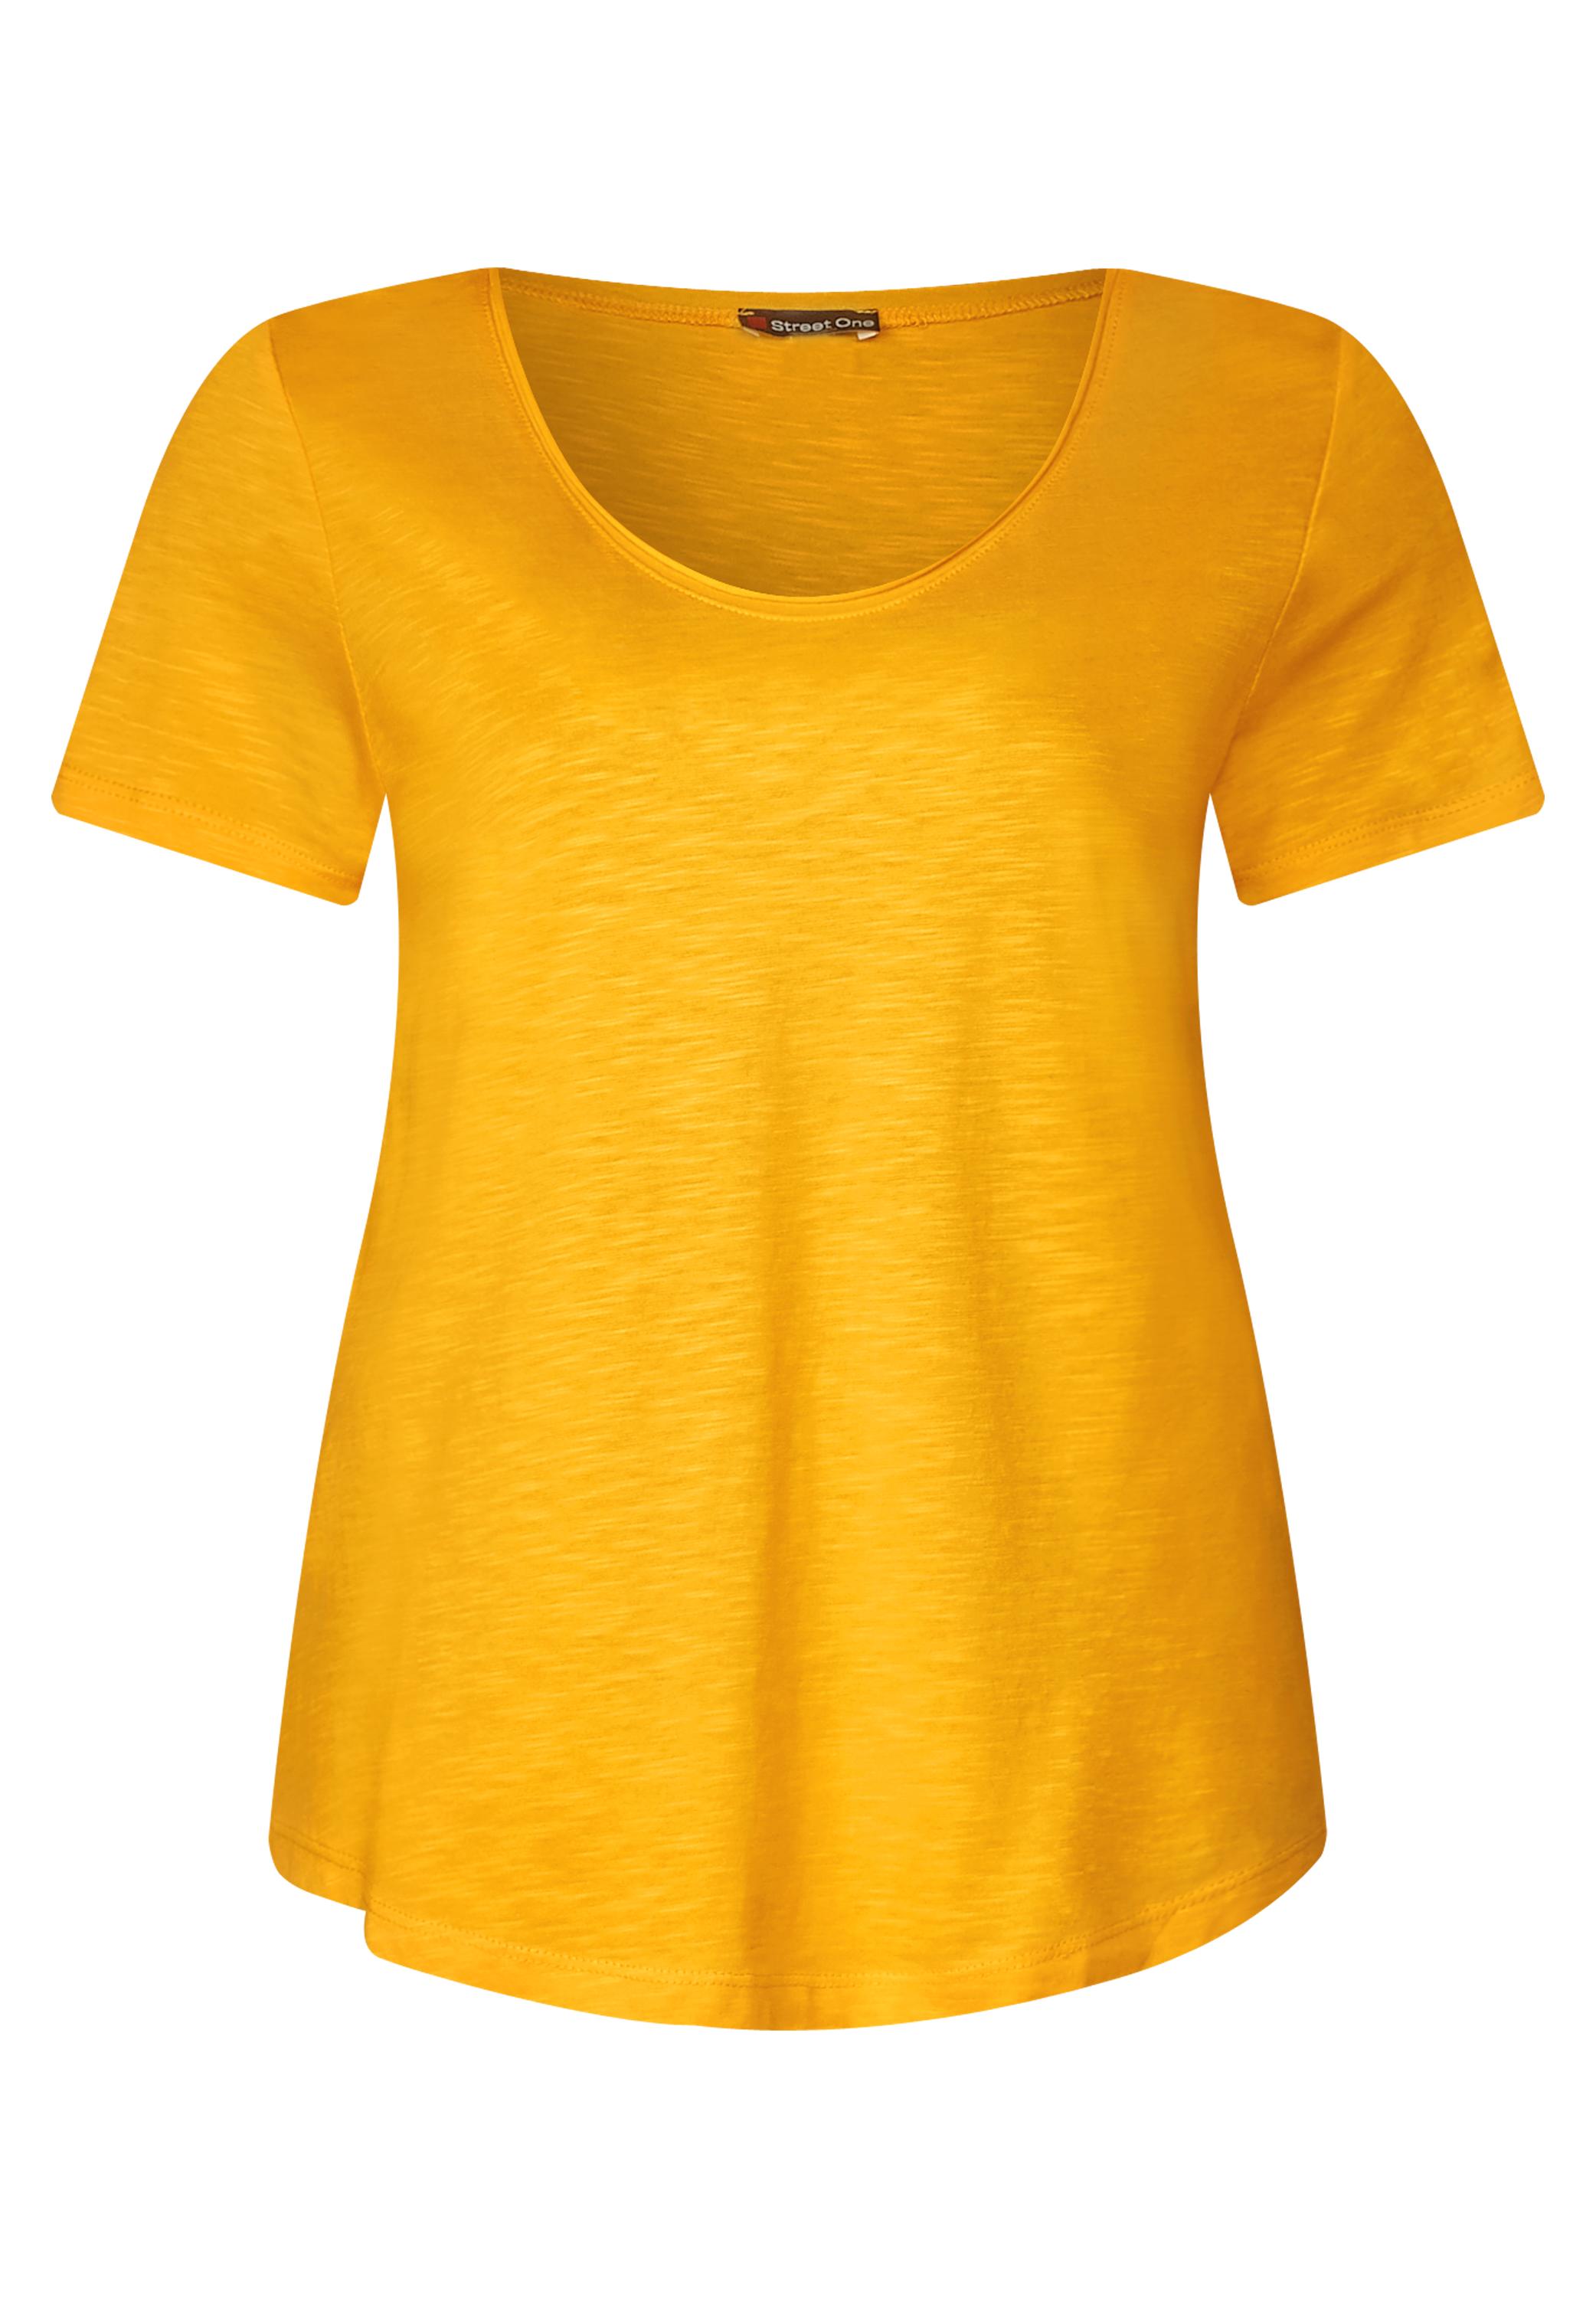 Clementine CONCEPT in Bright - Mode One Gerda A313386-11804 T-Shirt Street